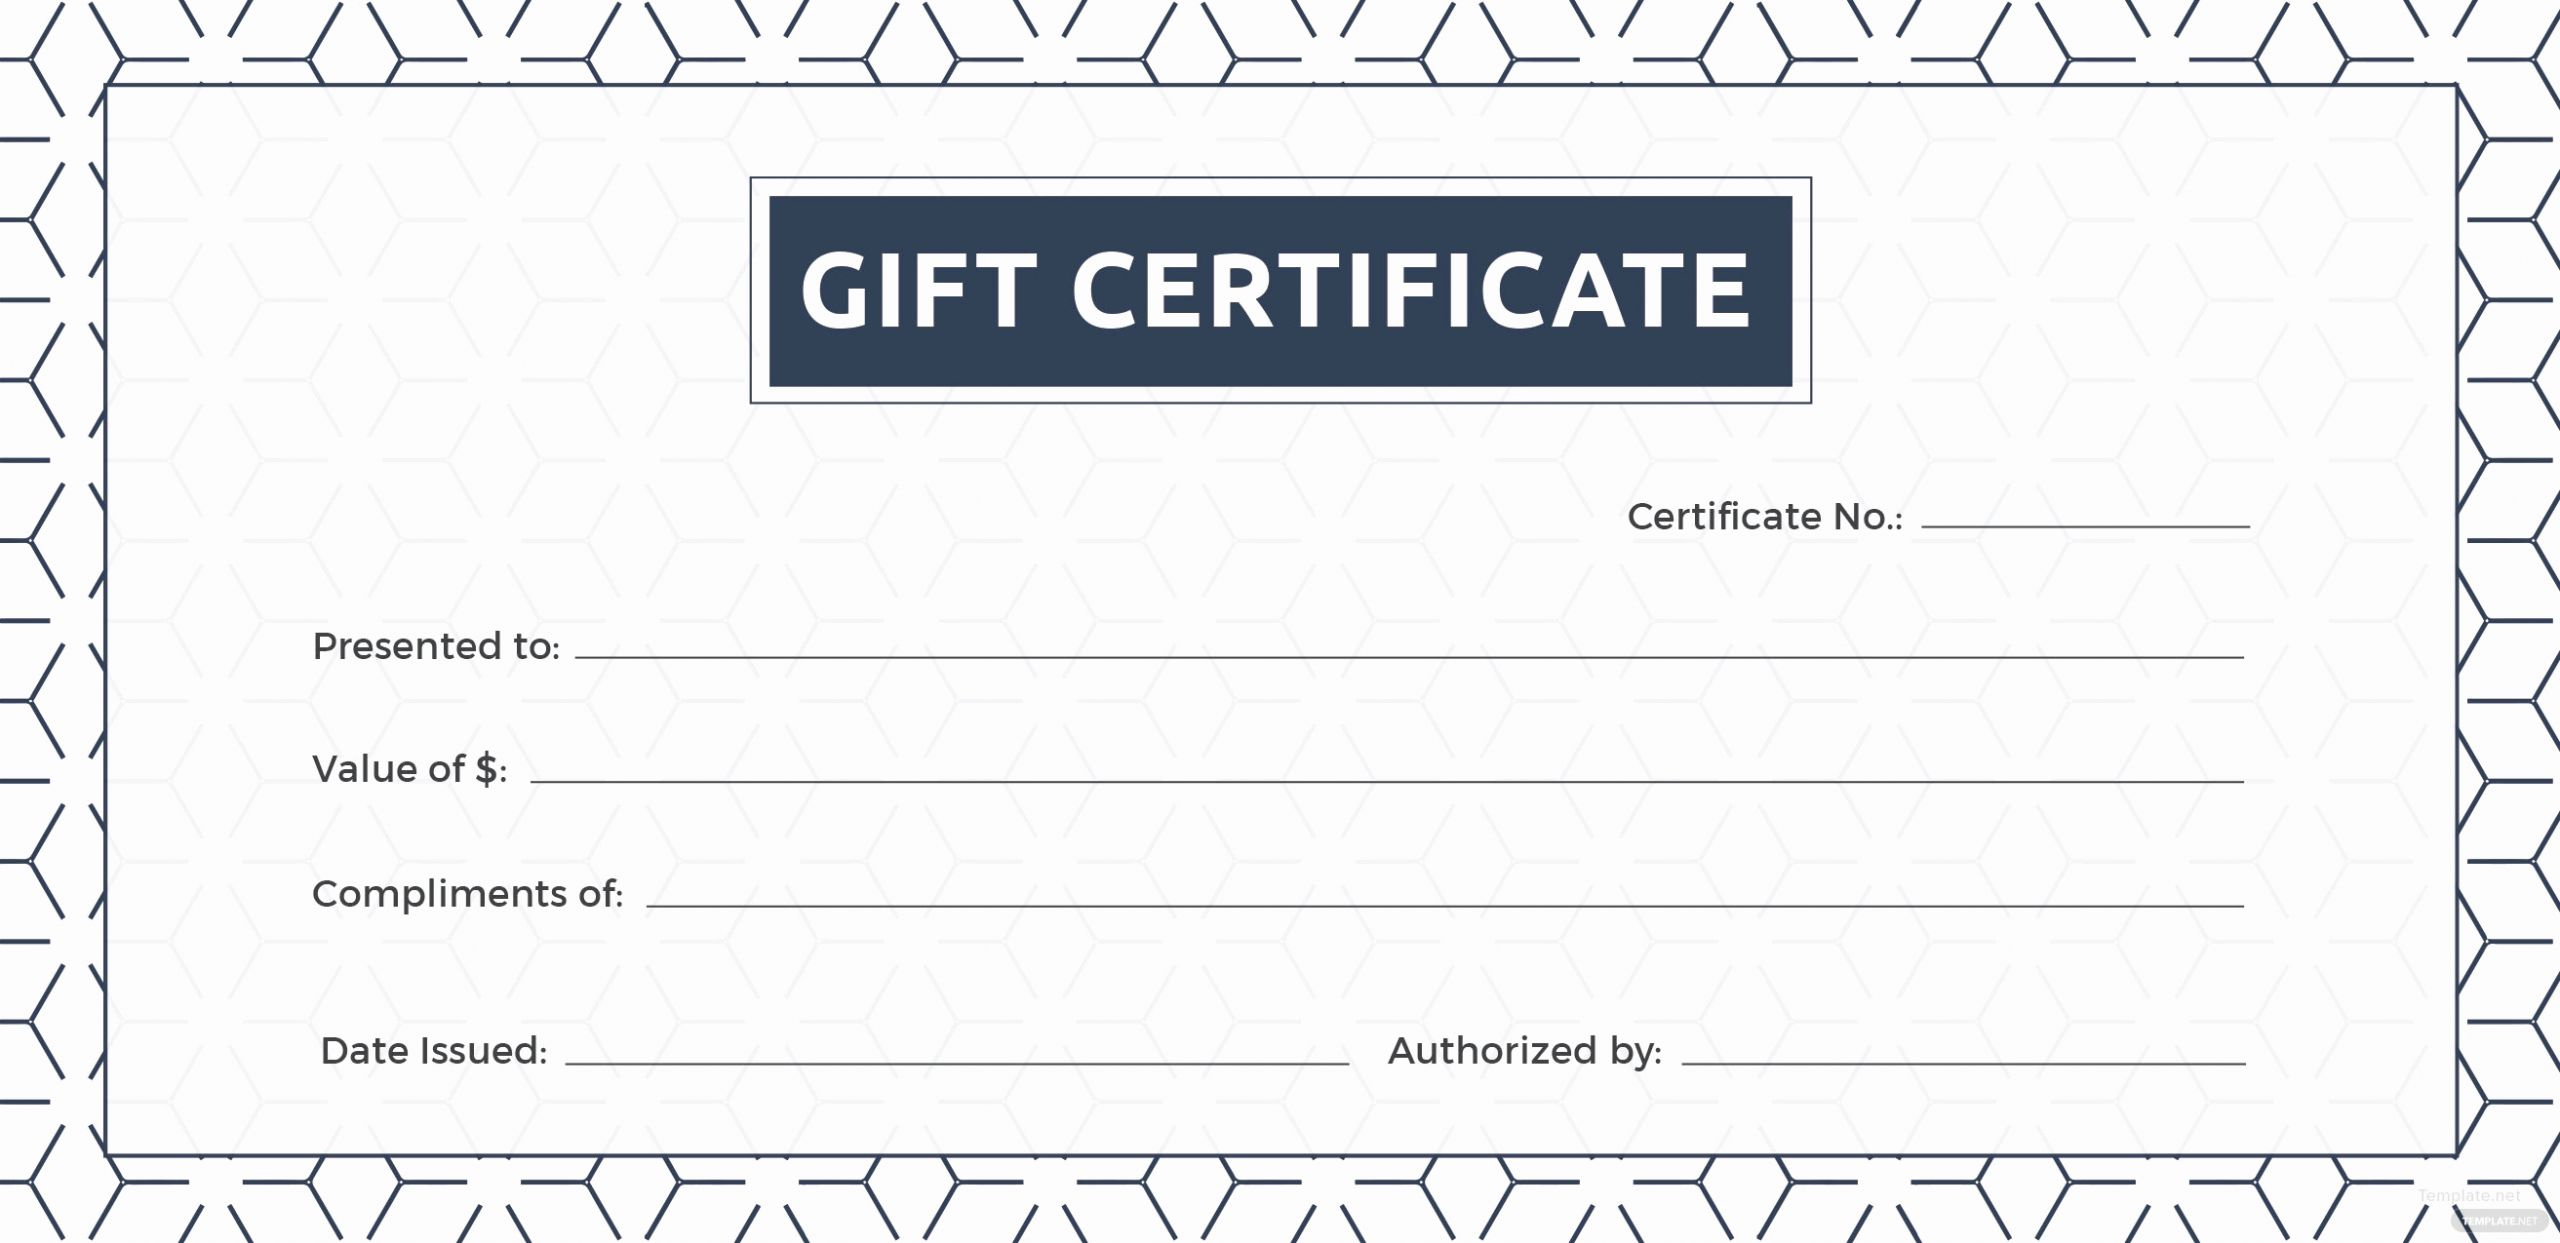 Printable Blank Gift Certificate Template Unique Free Blank Gift Certificate Template In Adobe Illustrator